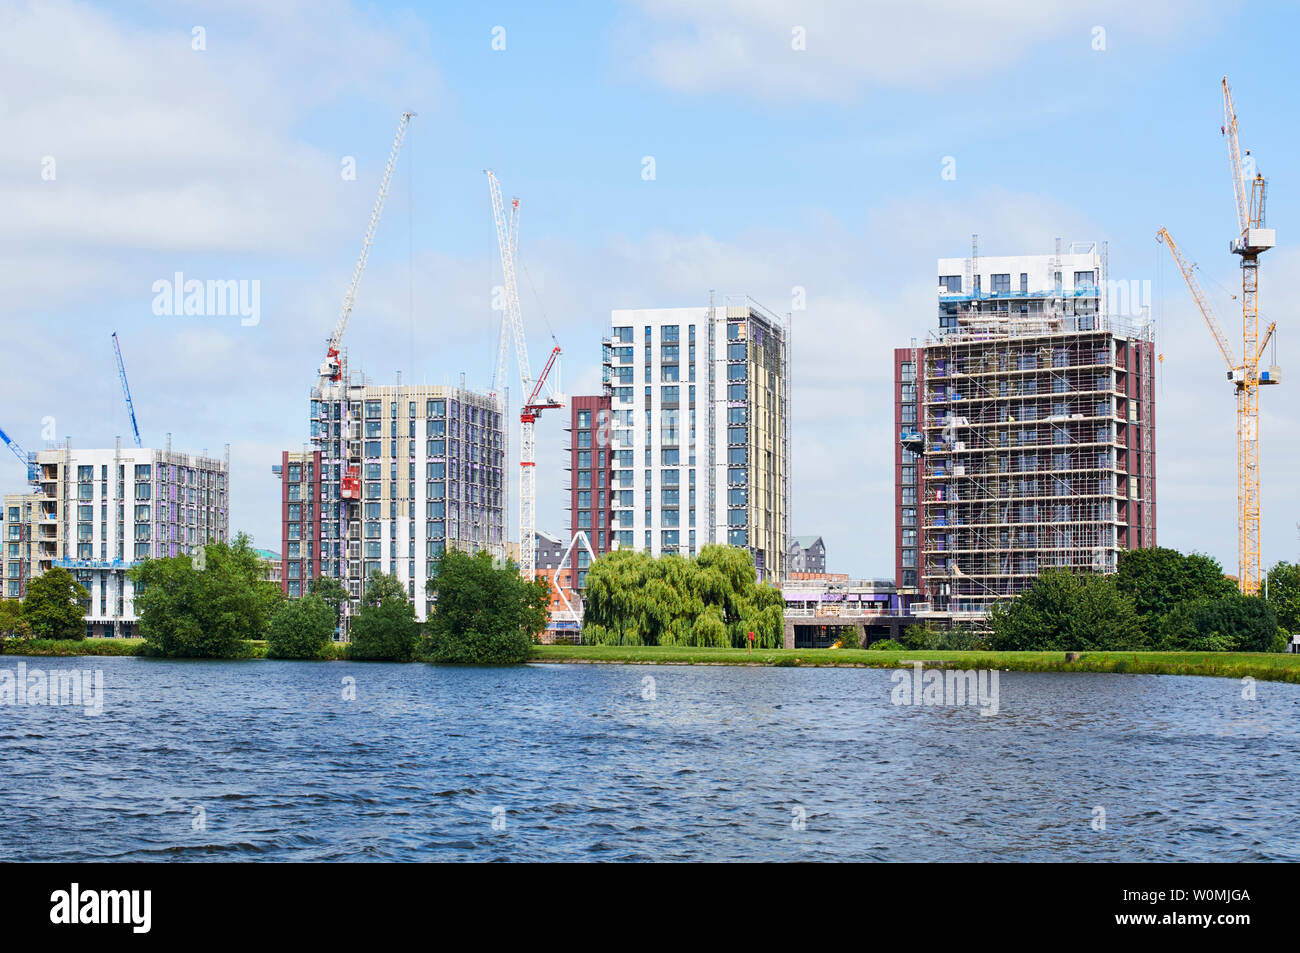 New apartment buildings under construction on the edge of Walthamstow Wetlands, North London UK Stock Photo